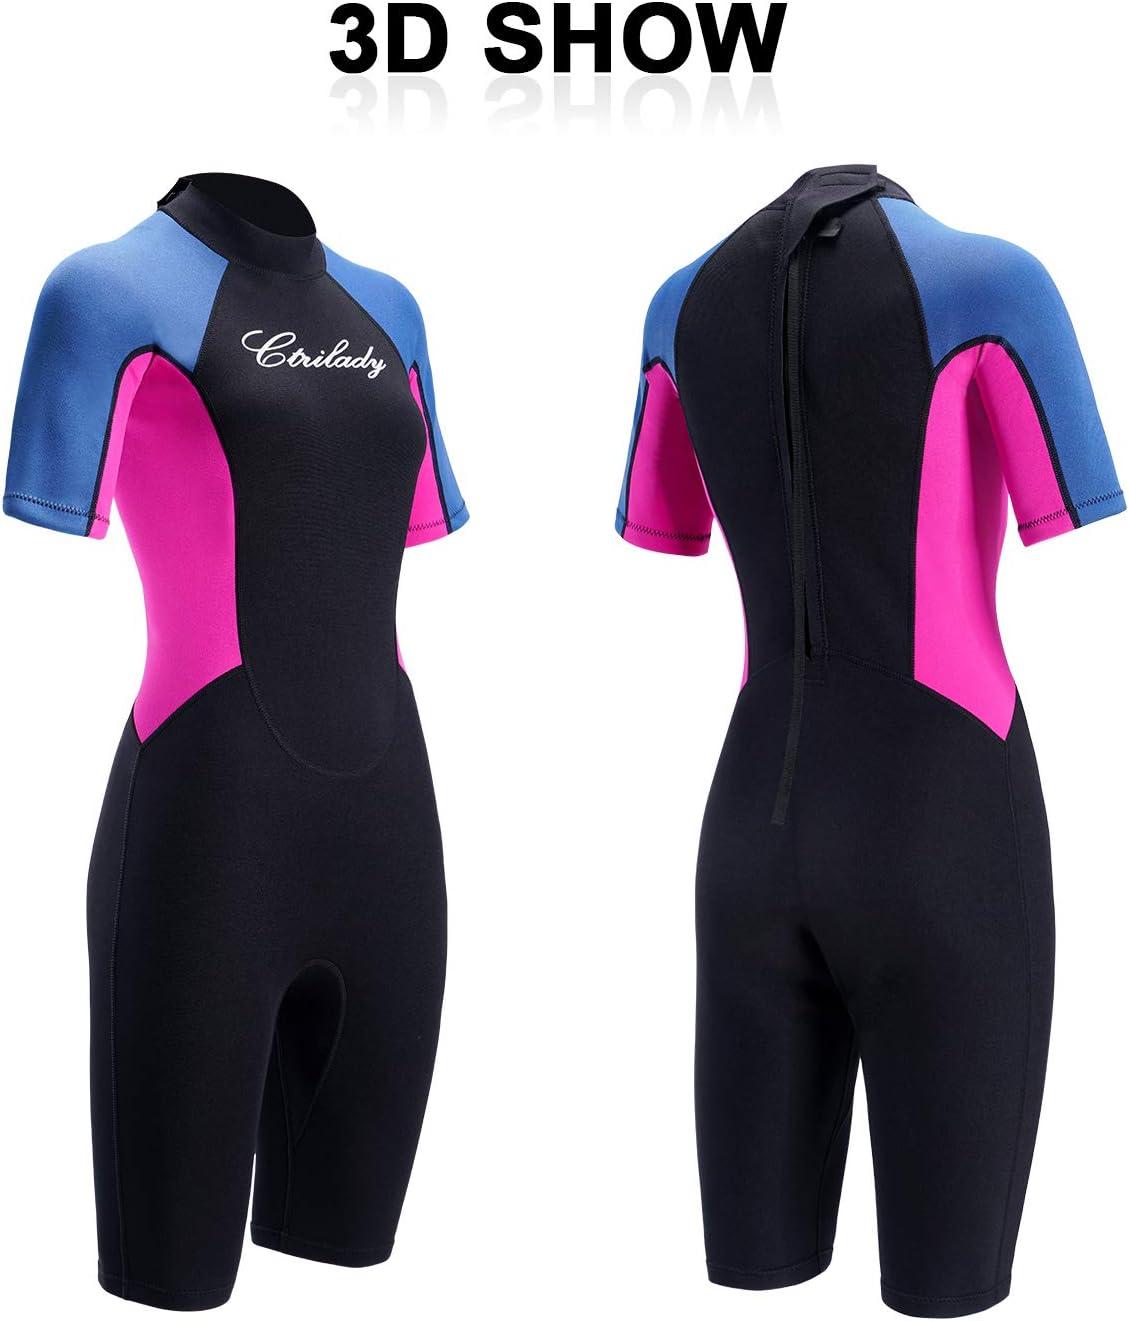 CtriLady Wetsuit Shorty Wetsuit for Women 1.5mm Neoprene Short Sleeve  Diving Suits with Back Zipper UV Protection Full Body Swimwear for Swimming  Diving Surfing Kayaking Snorkeling Black Medium